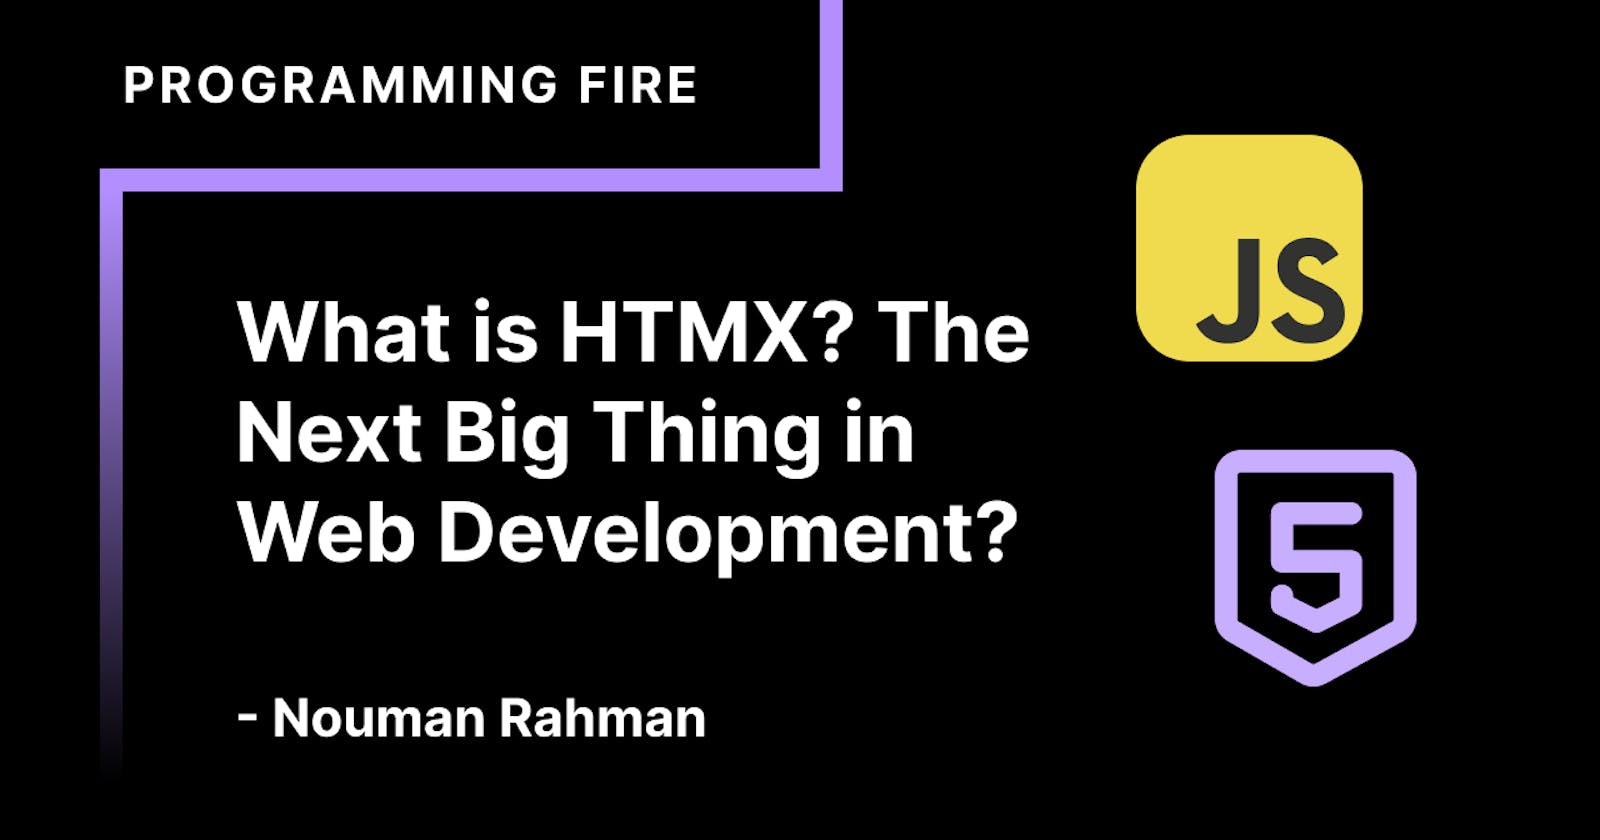 What is HTMX? The Next Big Thing in Web Development?